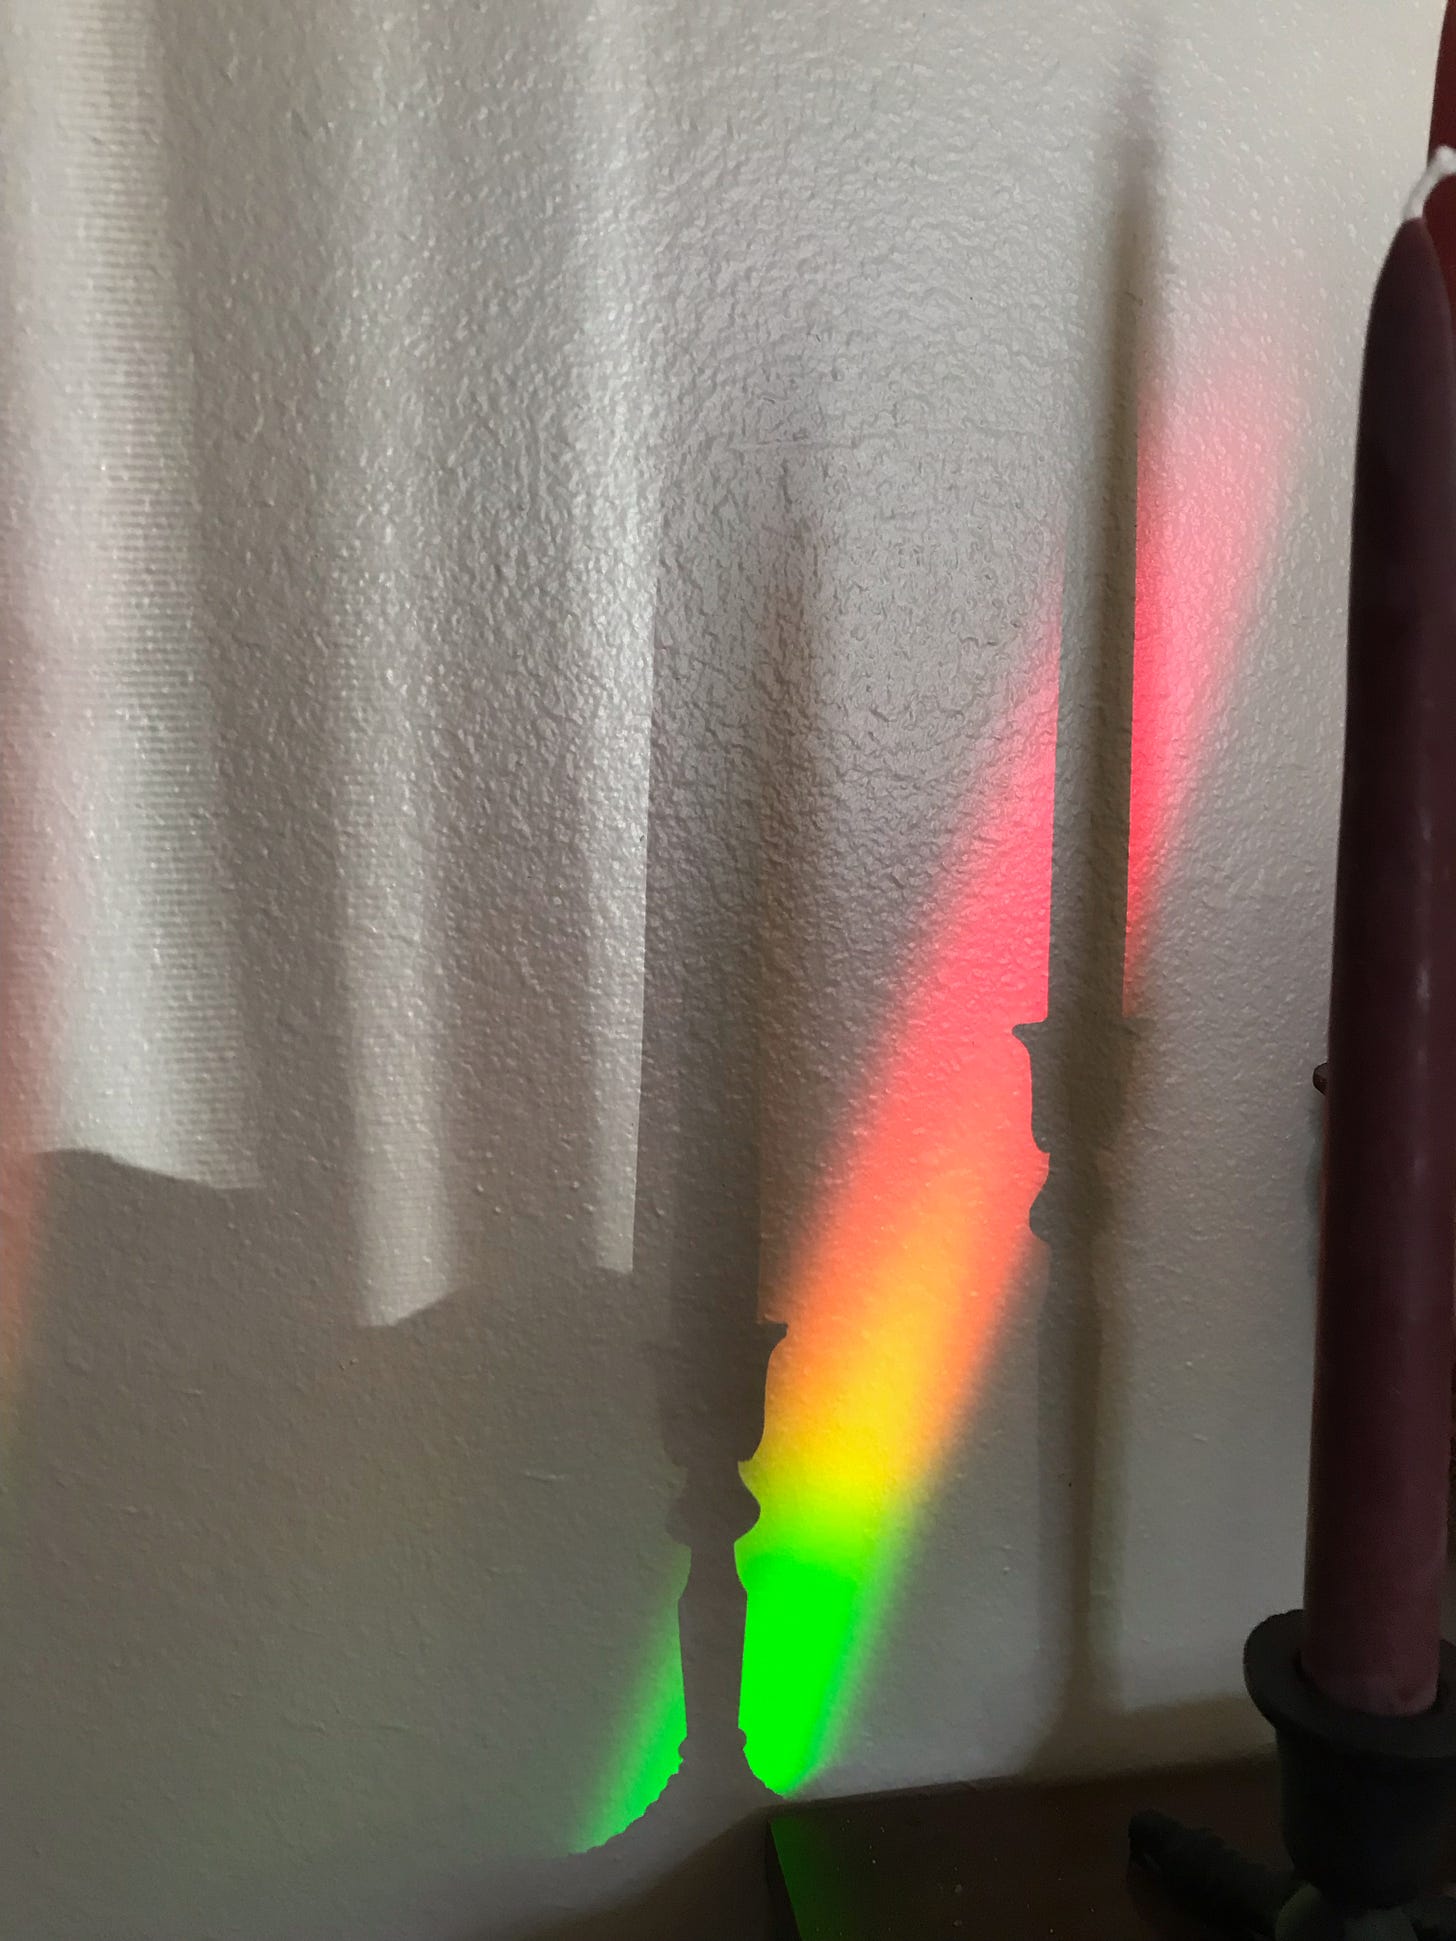 shadows of two taper candles and candlesticks on a white wall. a streak of red-yellow-green light shines on the wall.